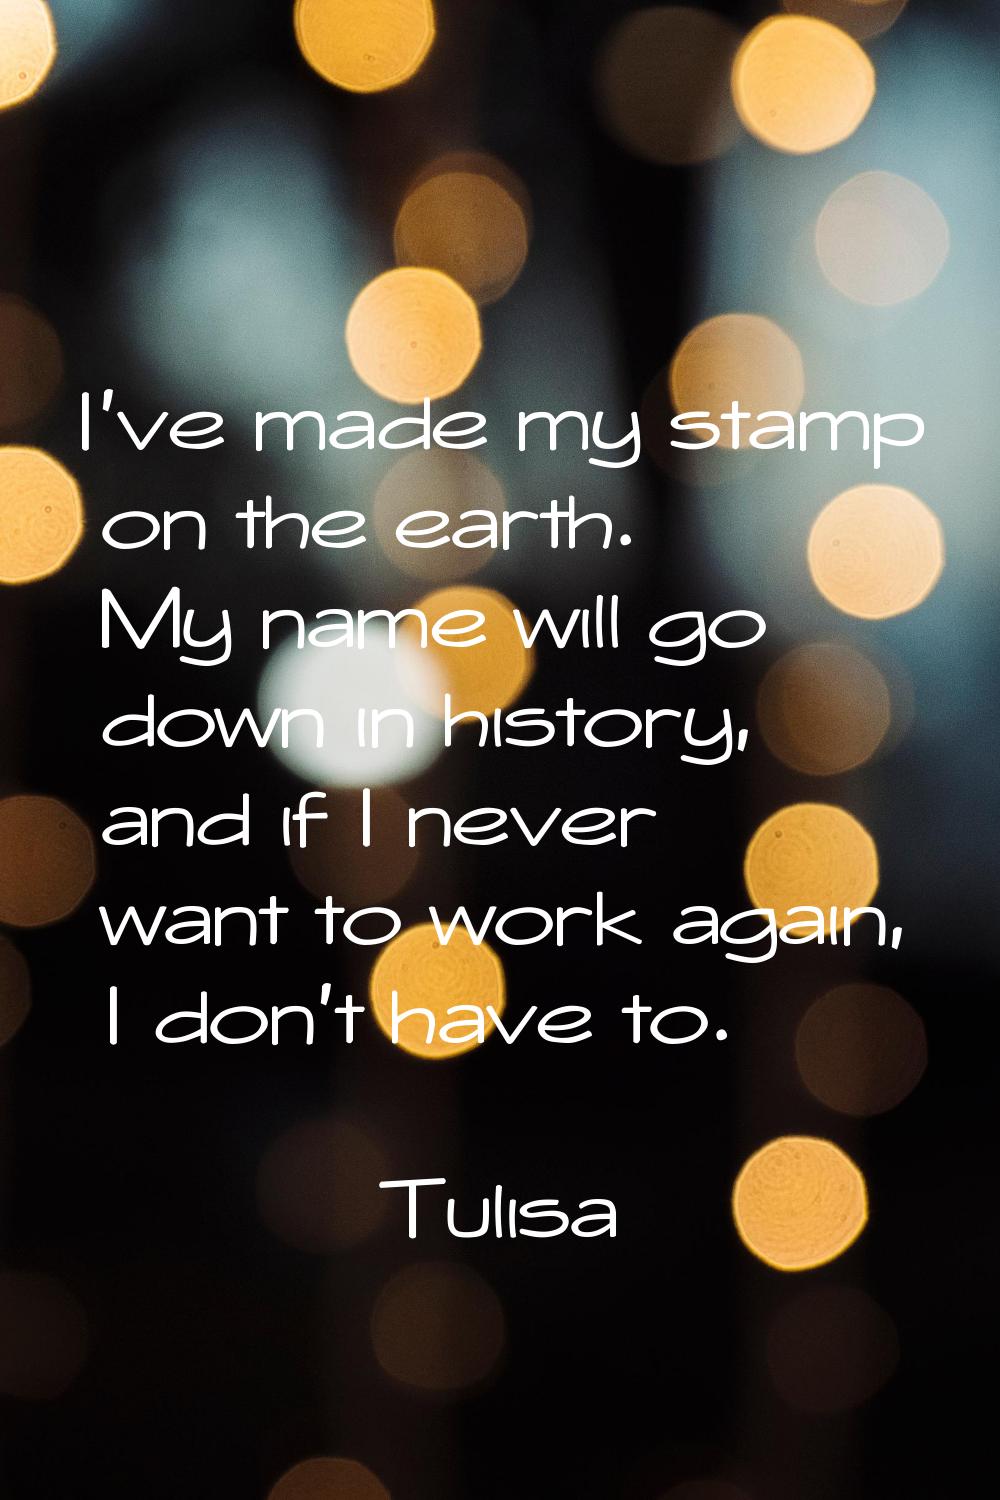 I've made my stamp on the earth. My name will go down in history, and if I never want to work again